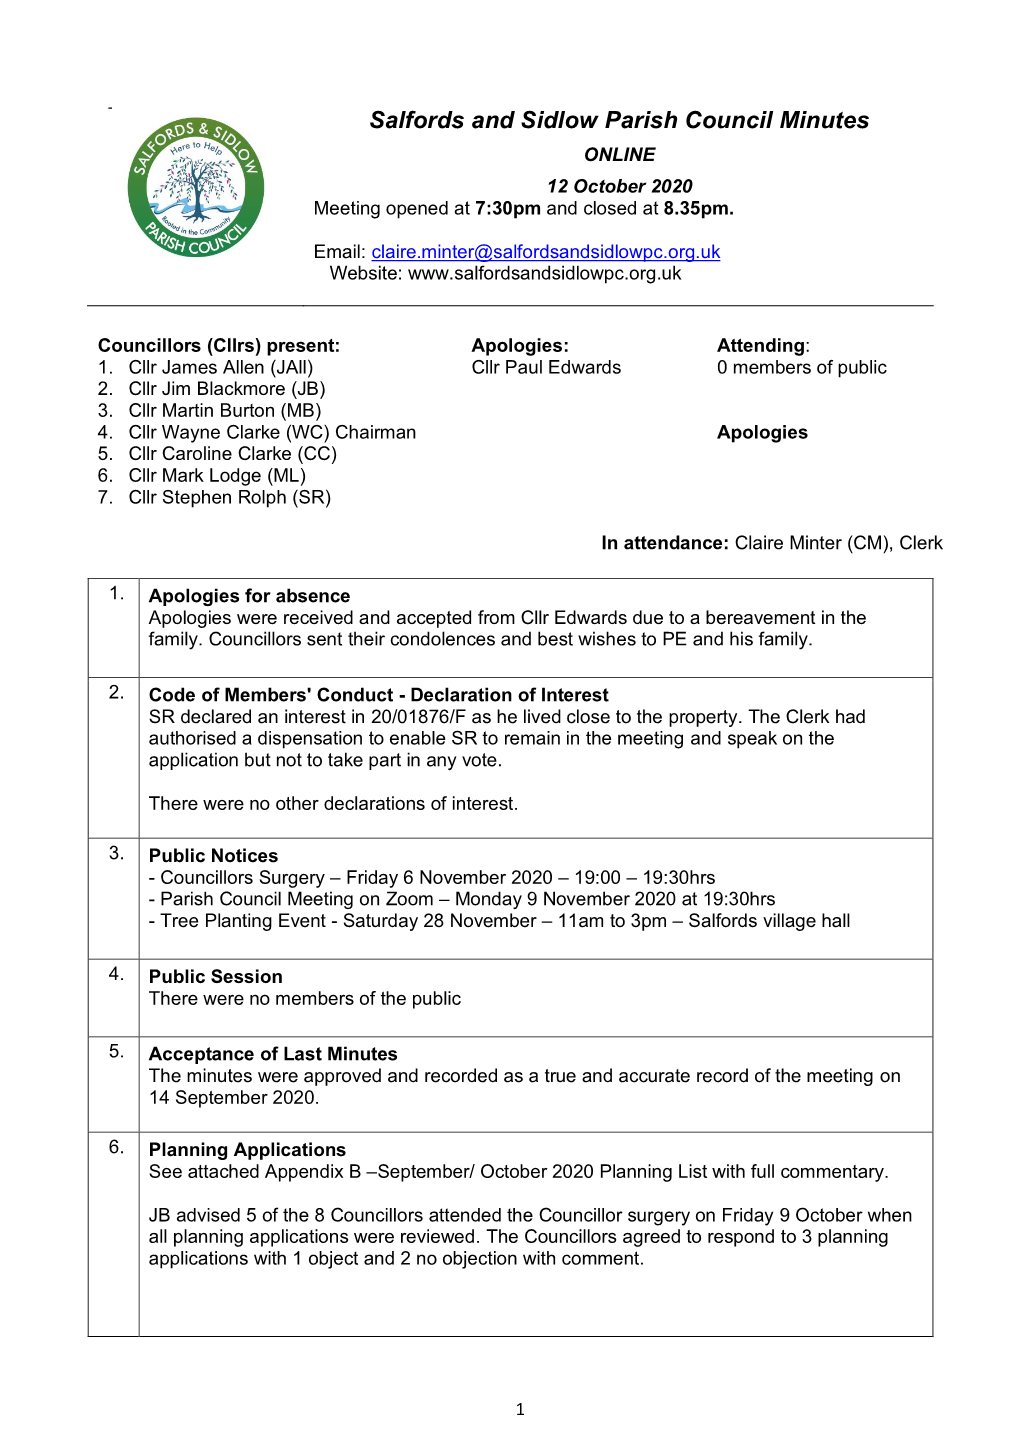 Salfords and Sidlow Parish Council Minutes ONLINE 12 October 2020 Meeting Opened at 7:30Pm and Closed at 8.35Pm